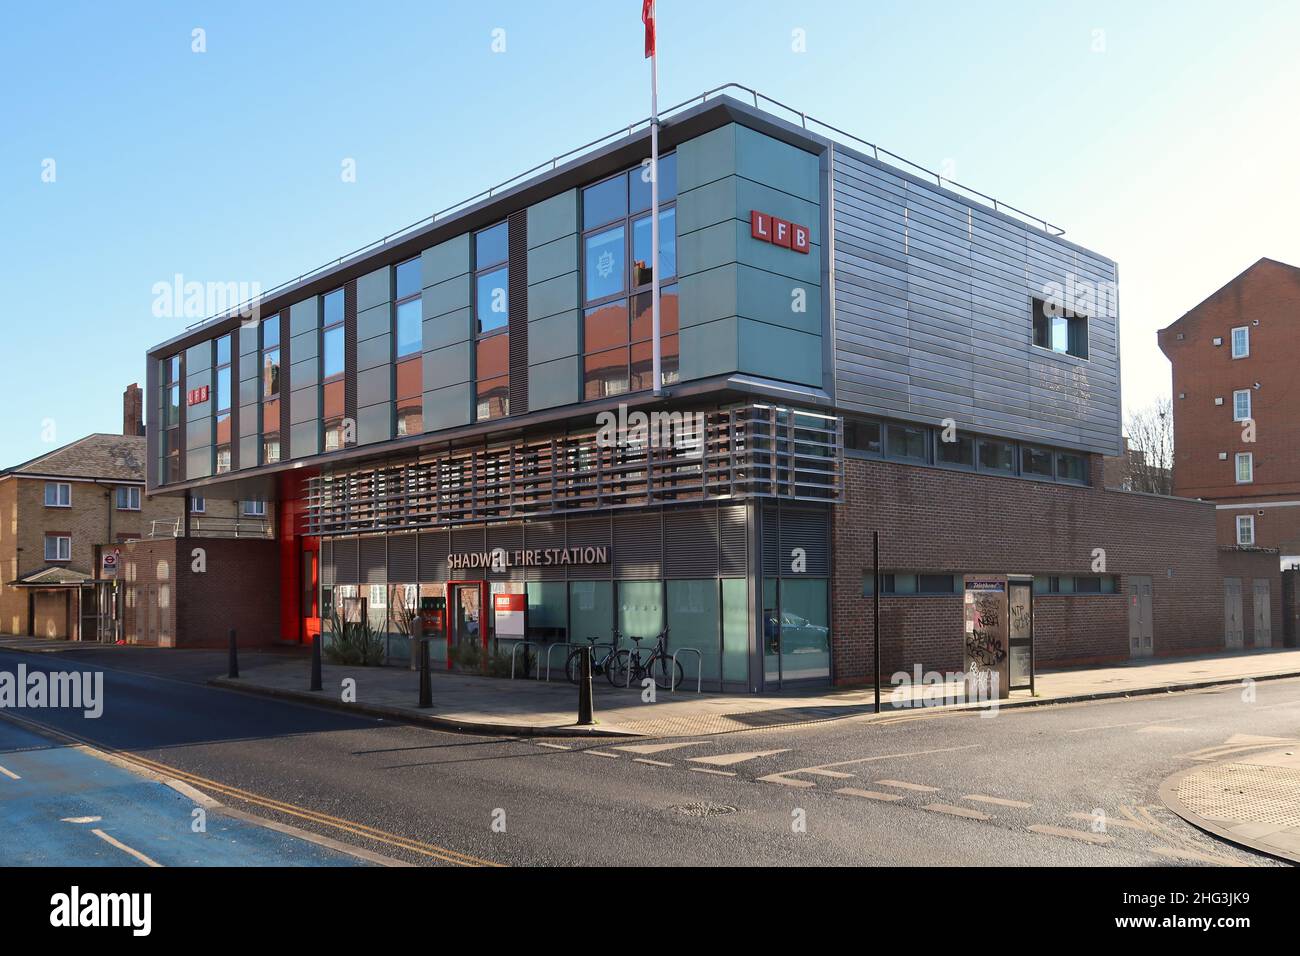 The newly rebuilt fire station at Shadwell, east London. Designed by BDP Arcitects, opened in 2014 Stock Photo